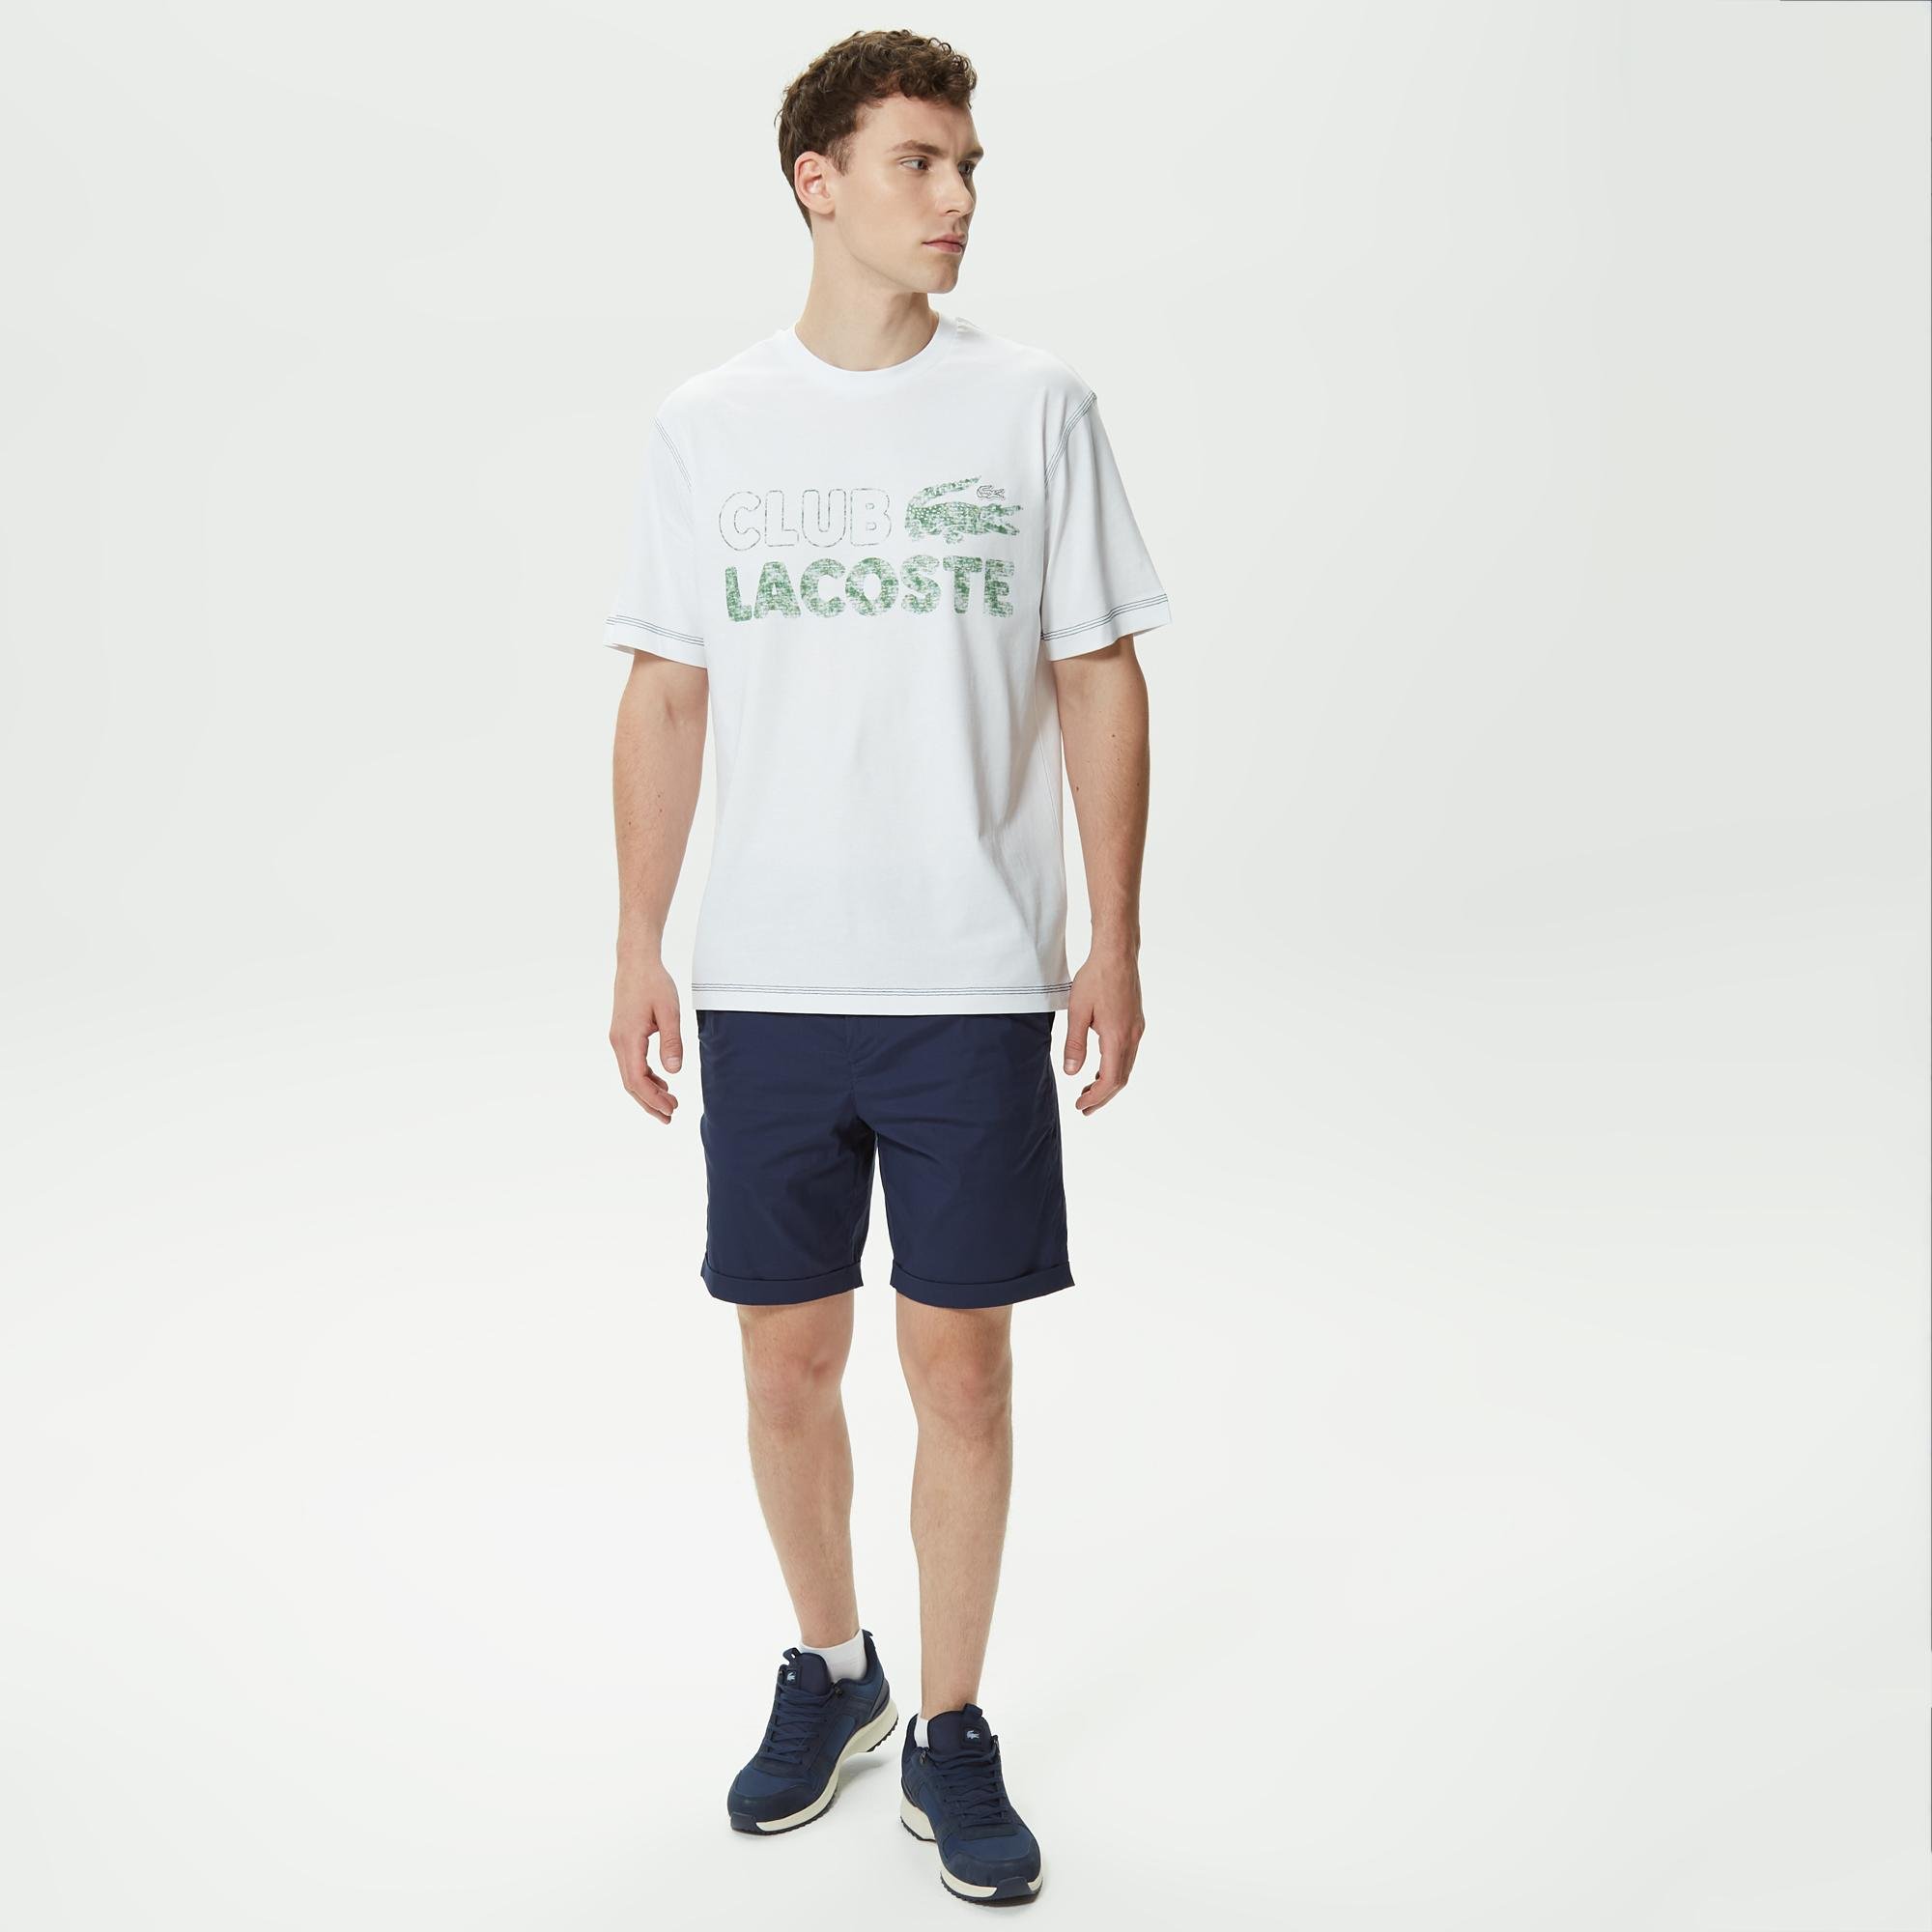 Lacoste Men's Relaxed Fit Printed T-Shirt